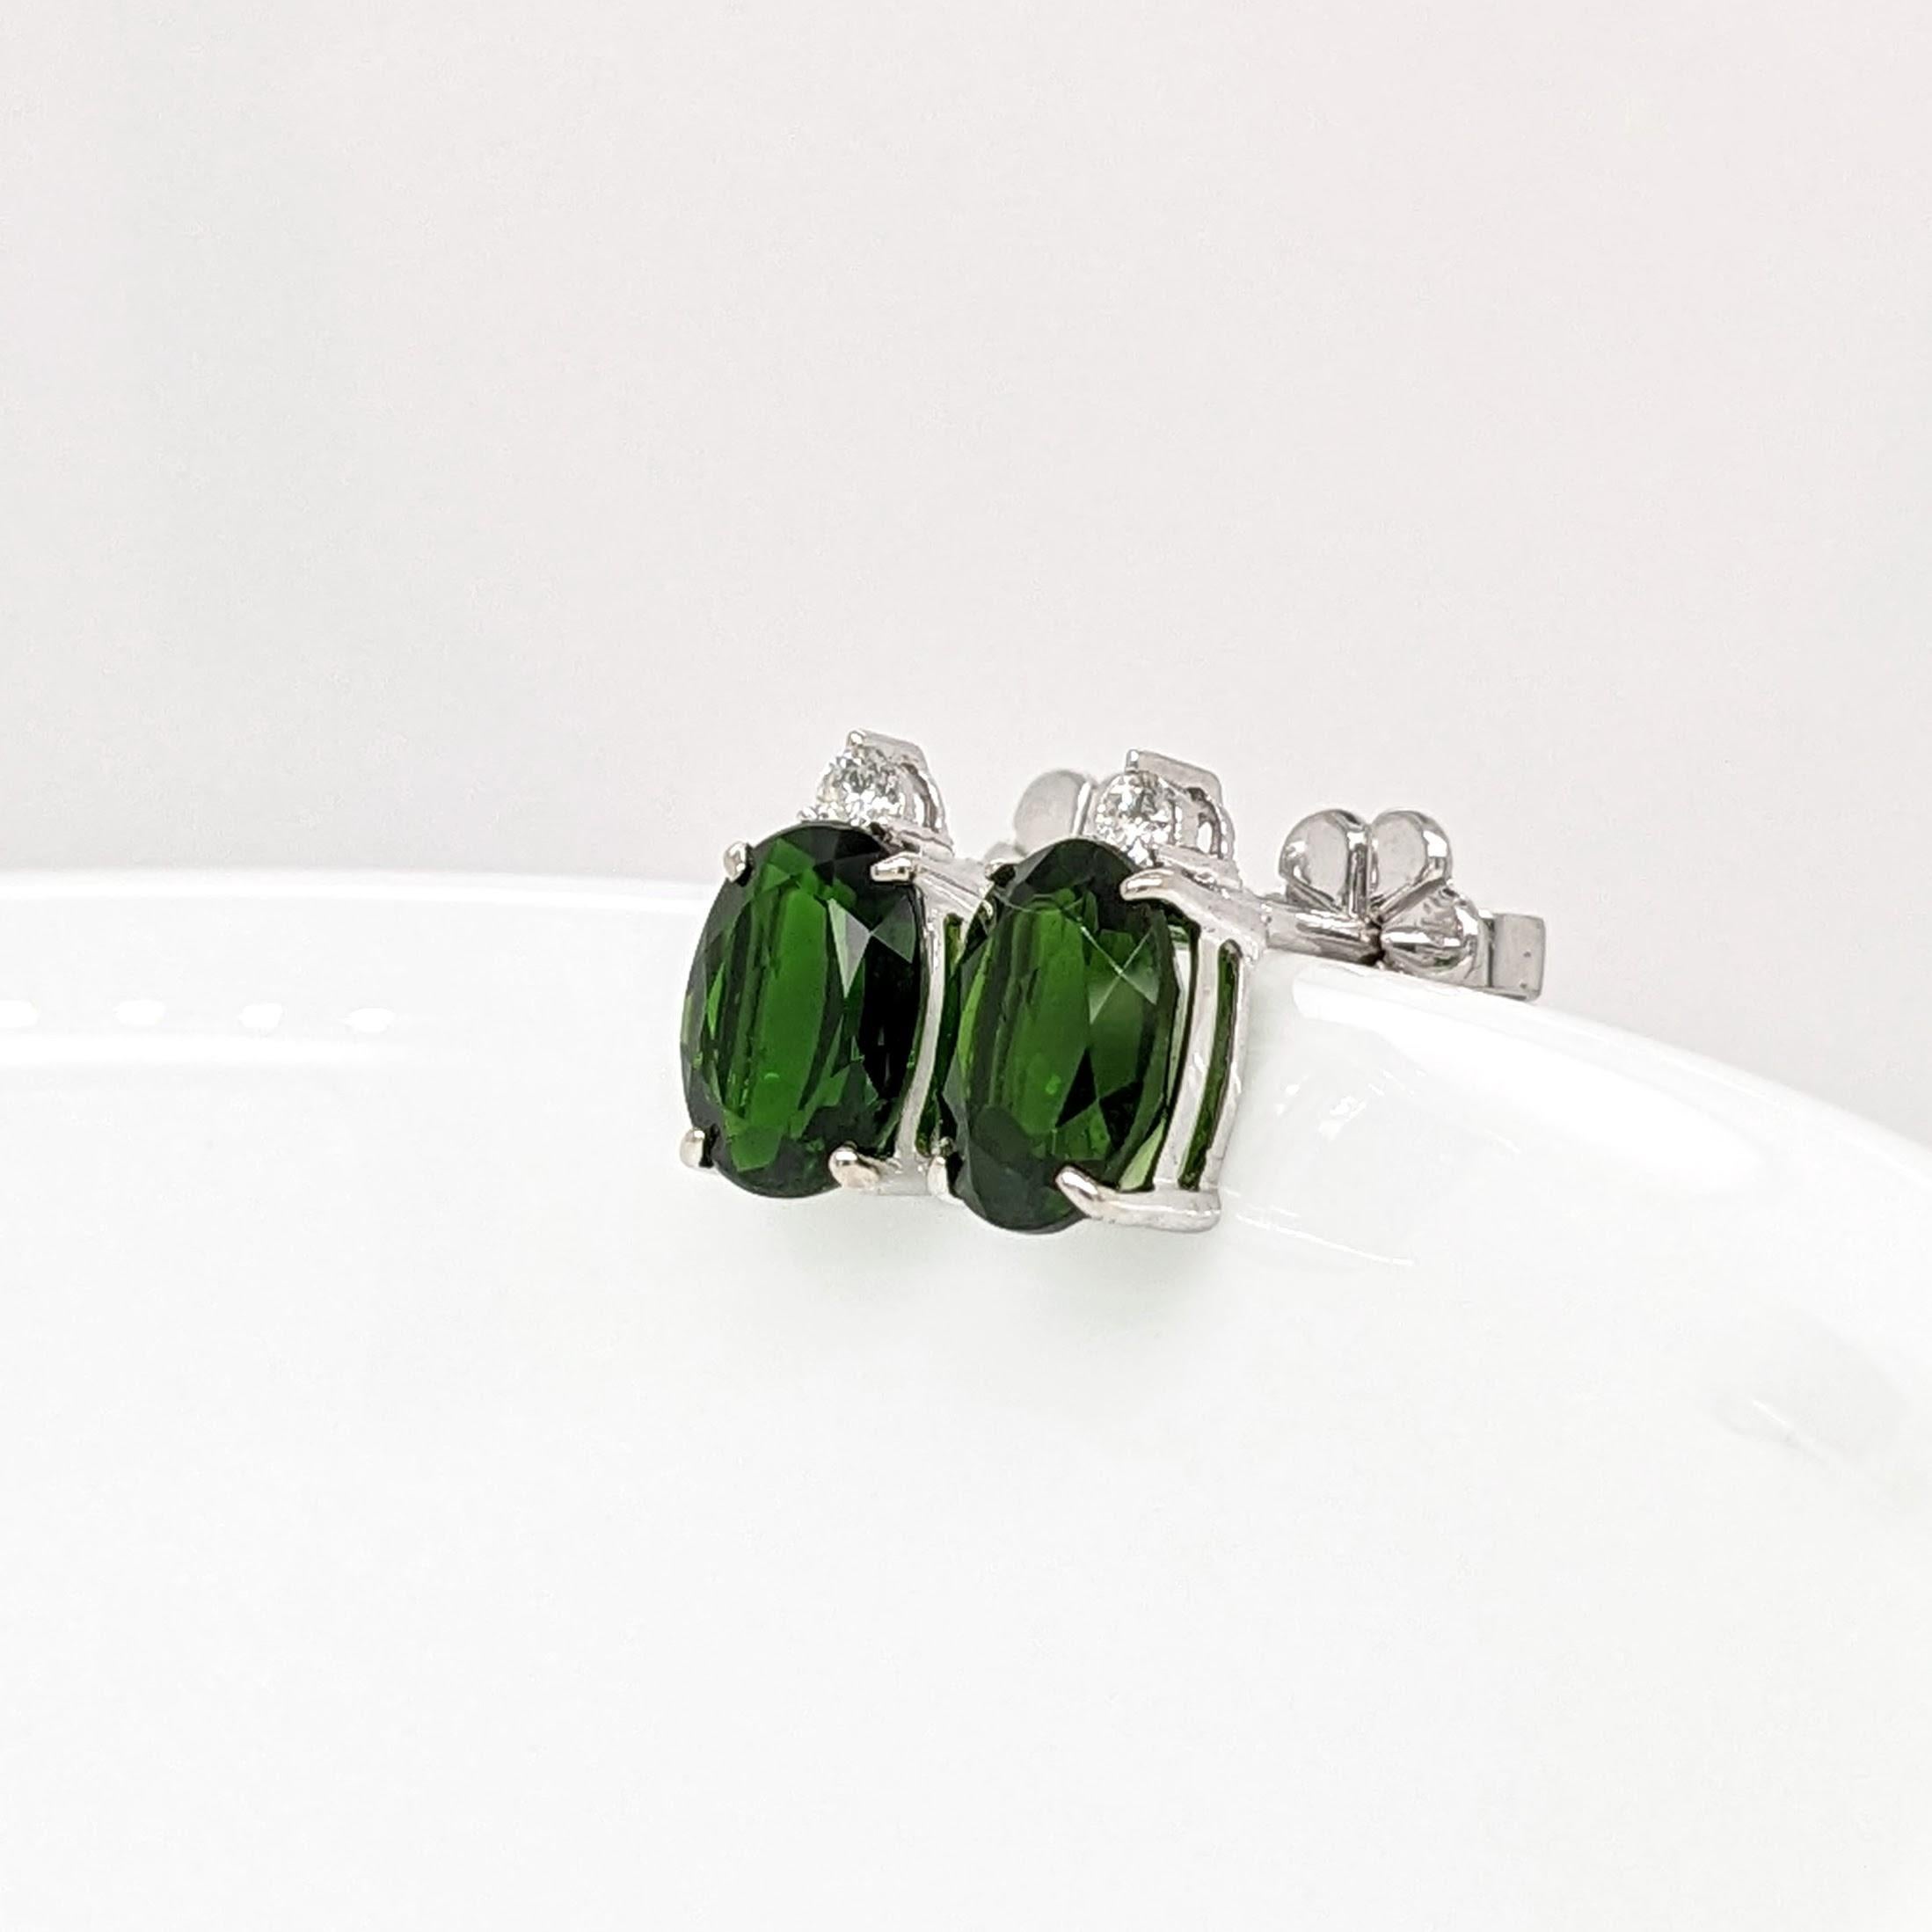 Modern 2.6ct Chrome Diopside Earrings w Natural Diamonds in Solid 14K Gold Oval 7x5mm